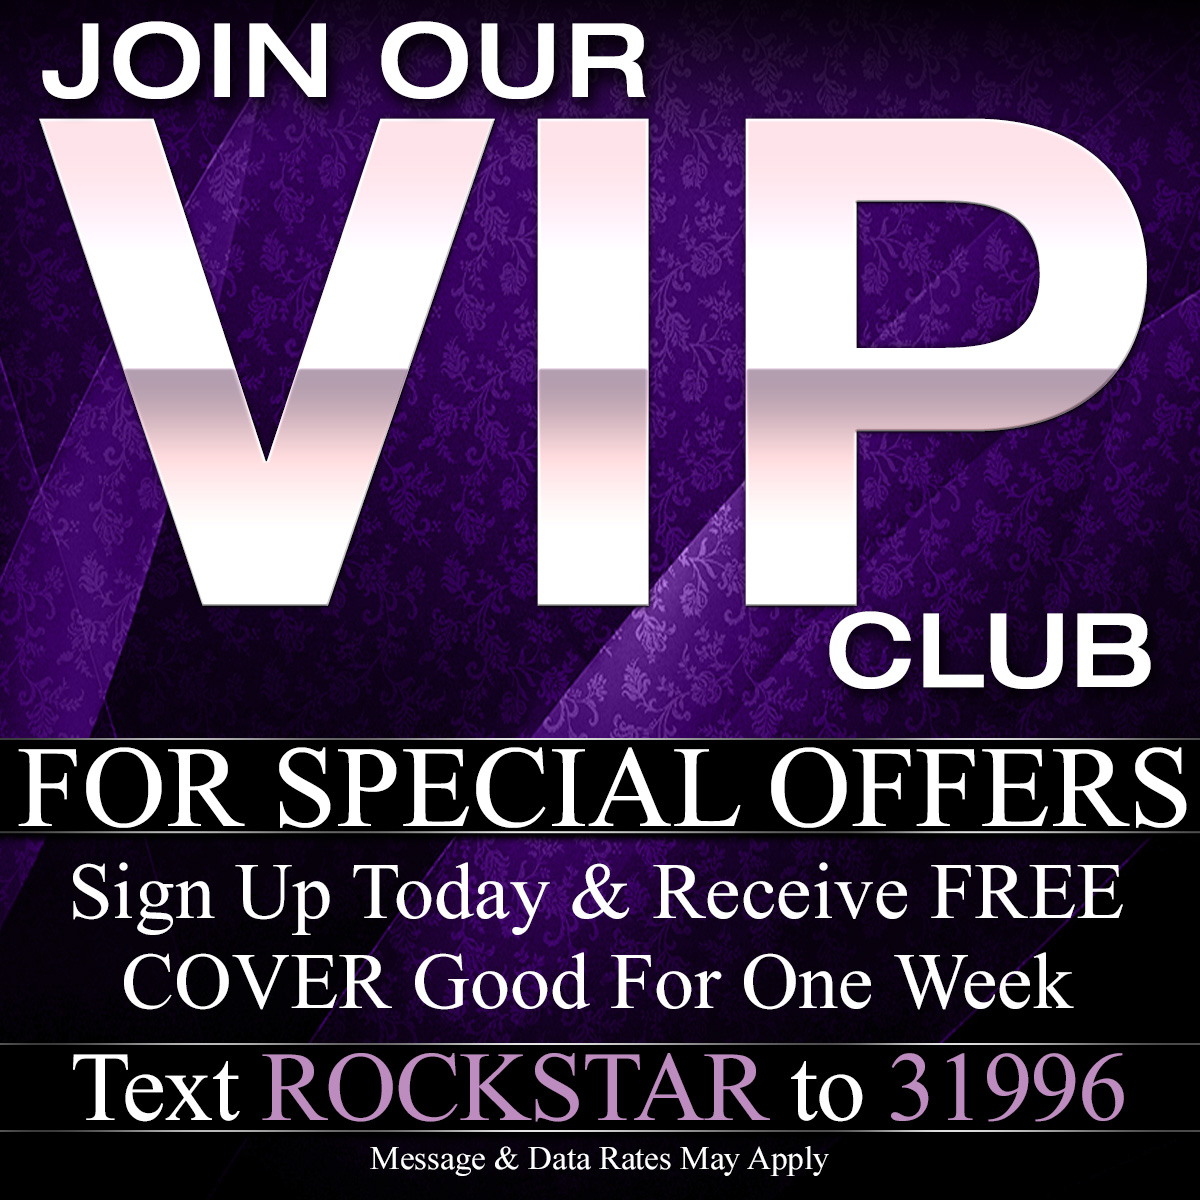 Text Rockstar To 31996 To Join Our VIP Mobile Membership